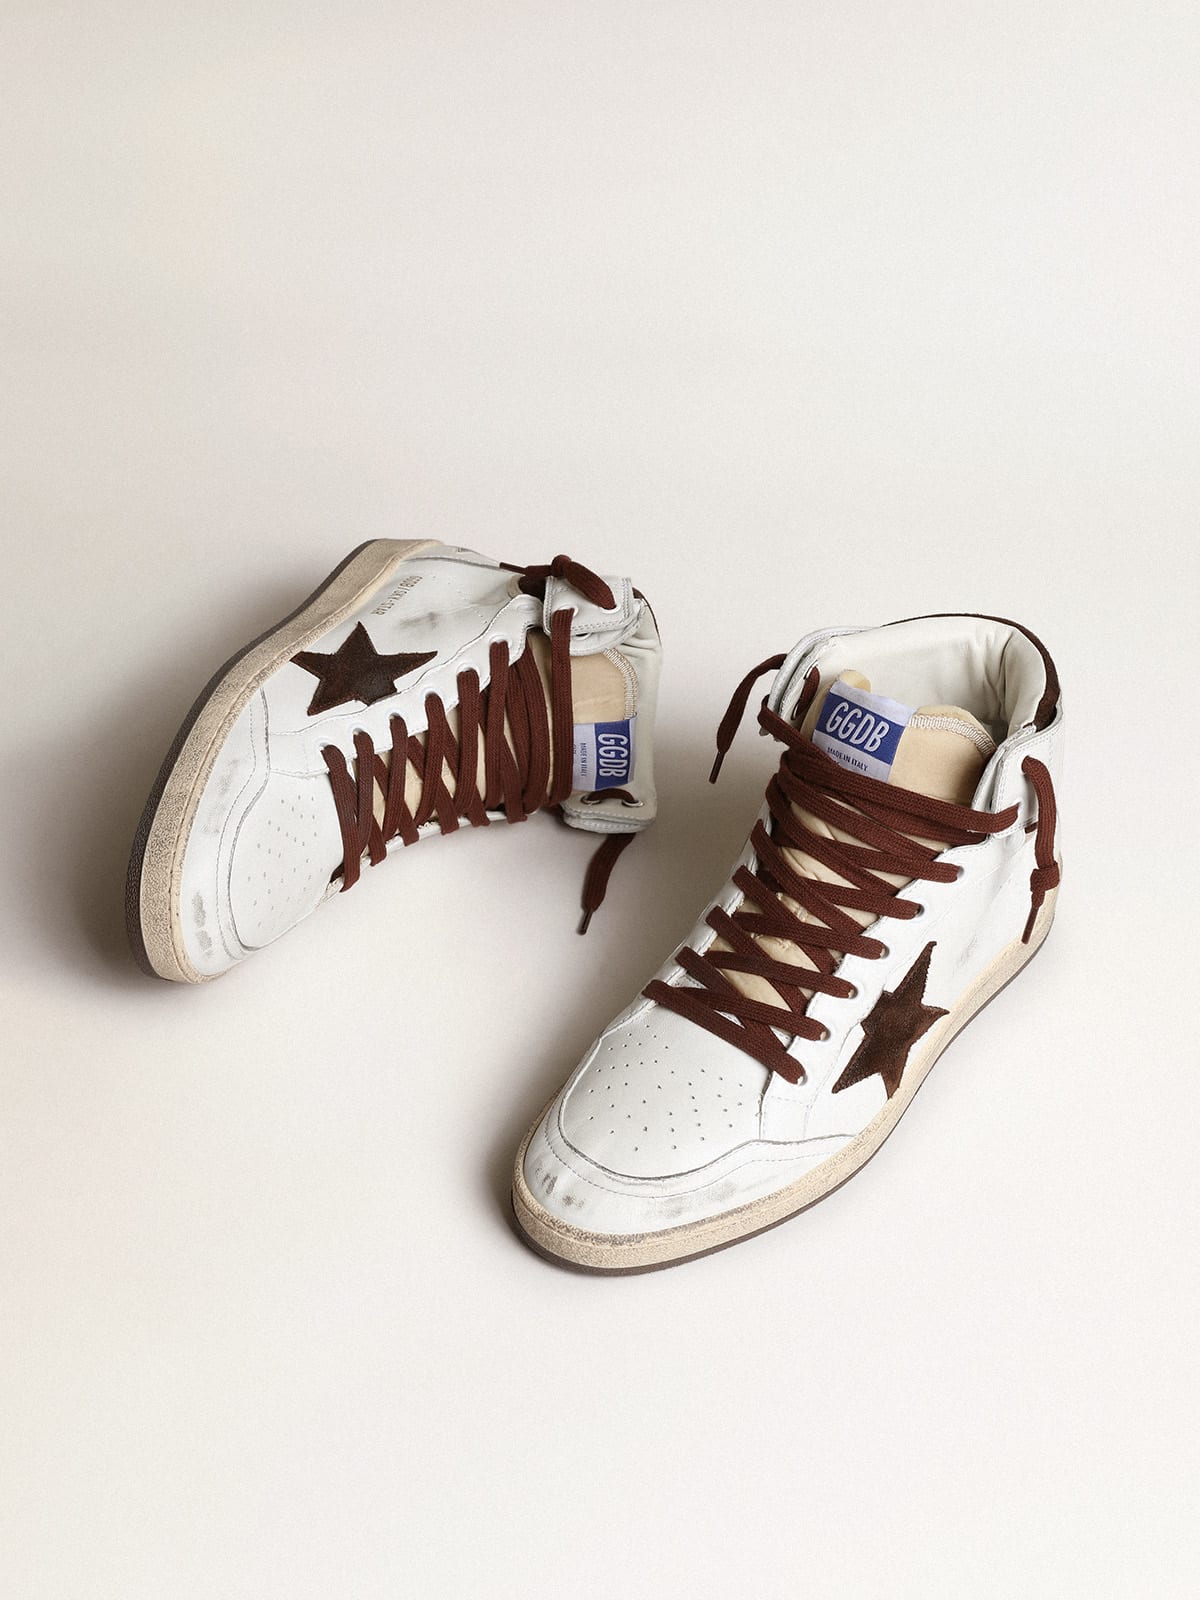 Golden Goose - Men’s Sky-Star in white nappa leather with a chocolate suede star in 